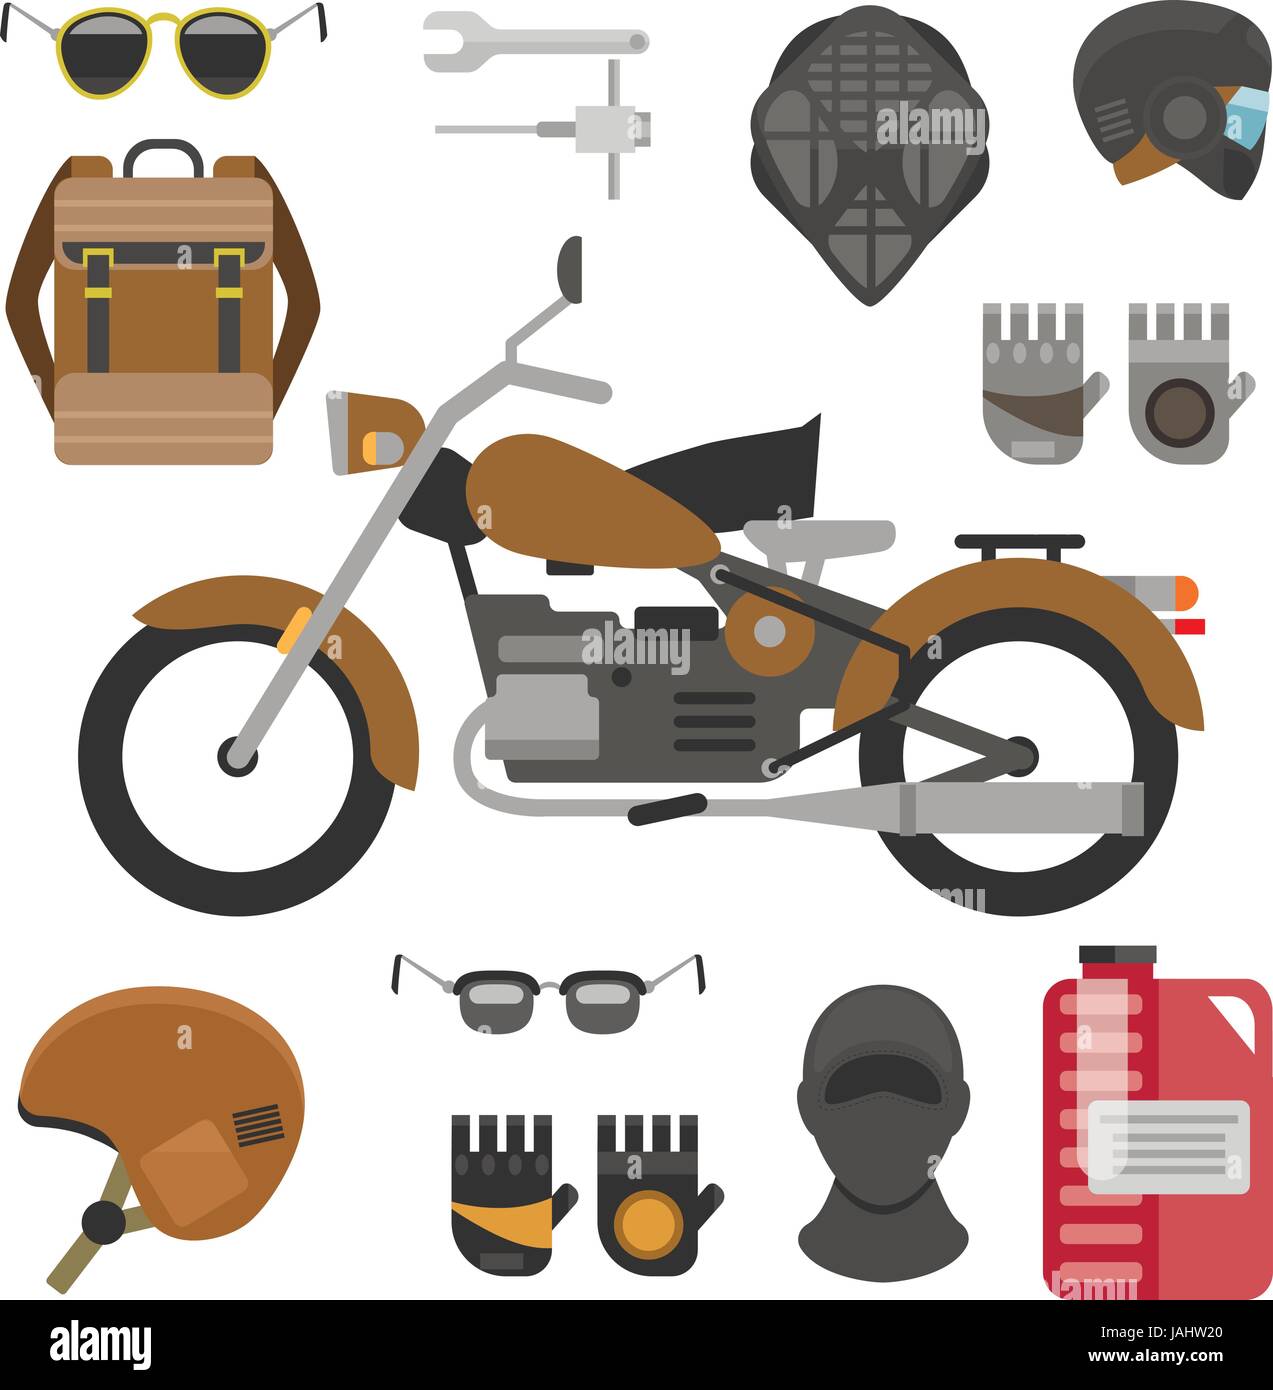 motorcycle with accessories set. helmets, backpack and motor oil. tools, sunglasses, mask and gloves. Stock Vector